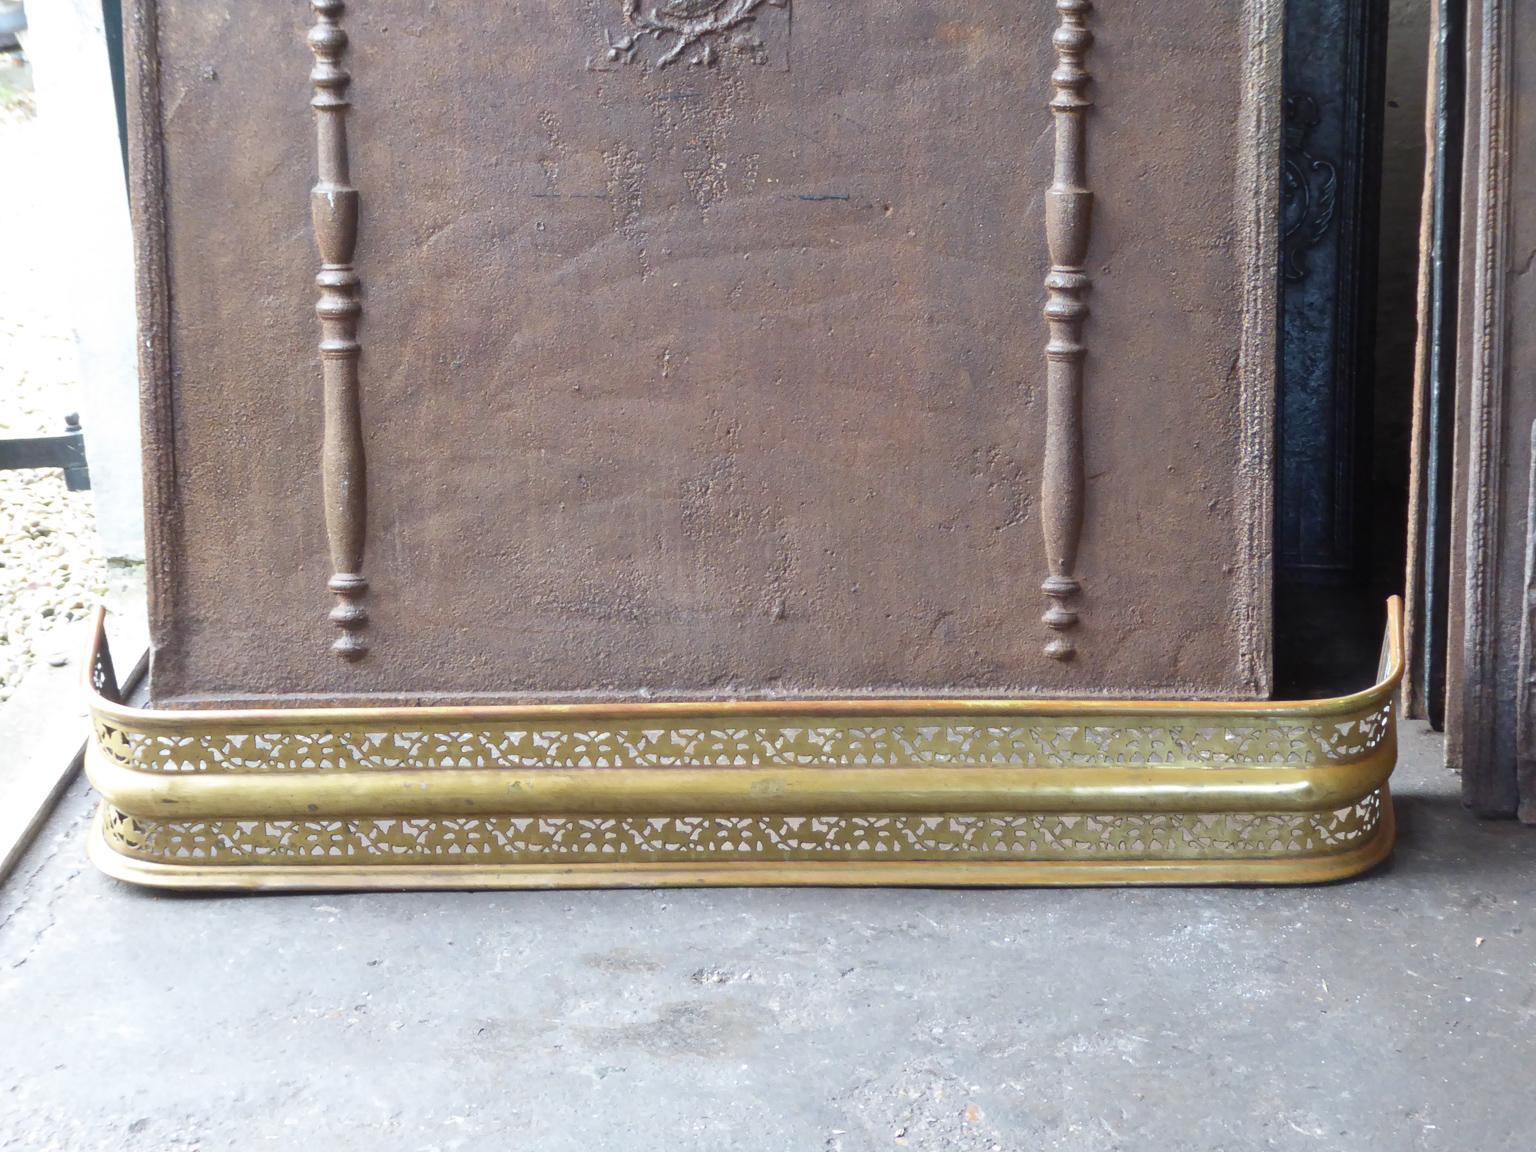 19th century English Victorian fireplace fender. The fender is made of brass and iron. The fender is in a good condition and is fully functional.